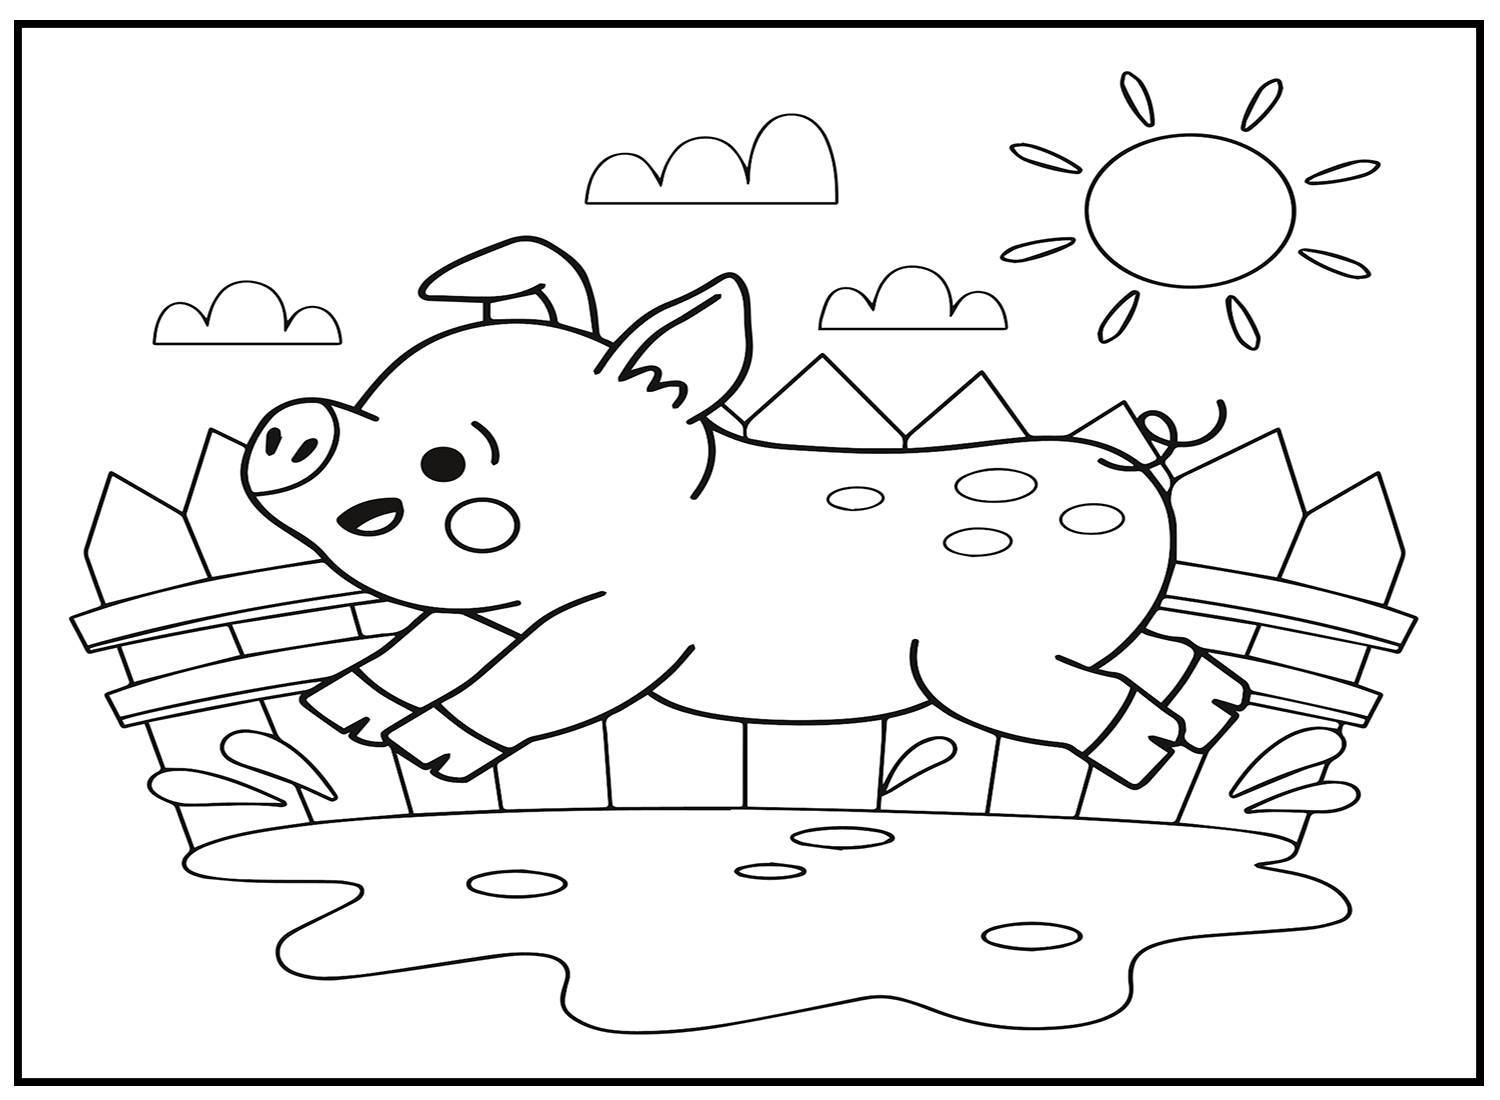 Kawaii Animal Images Coloring Pages